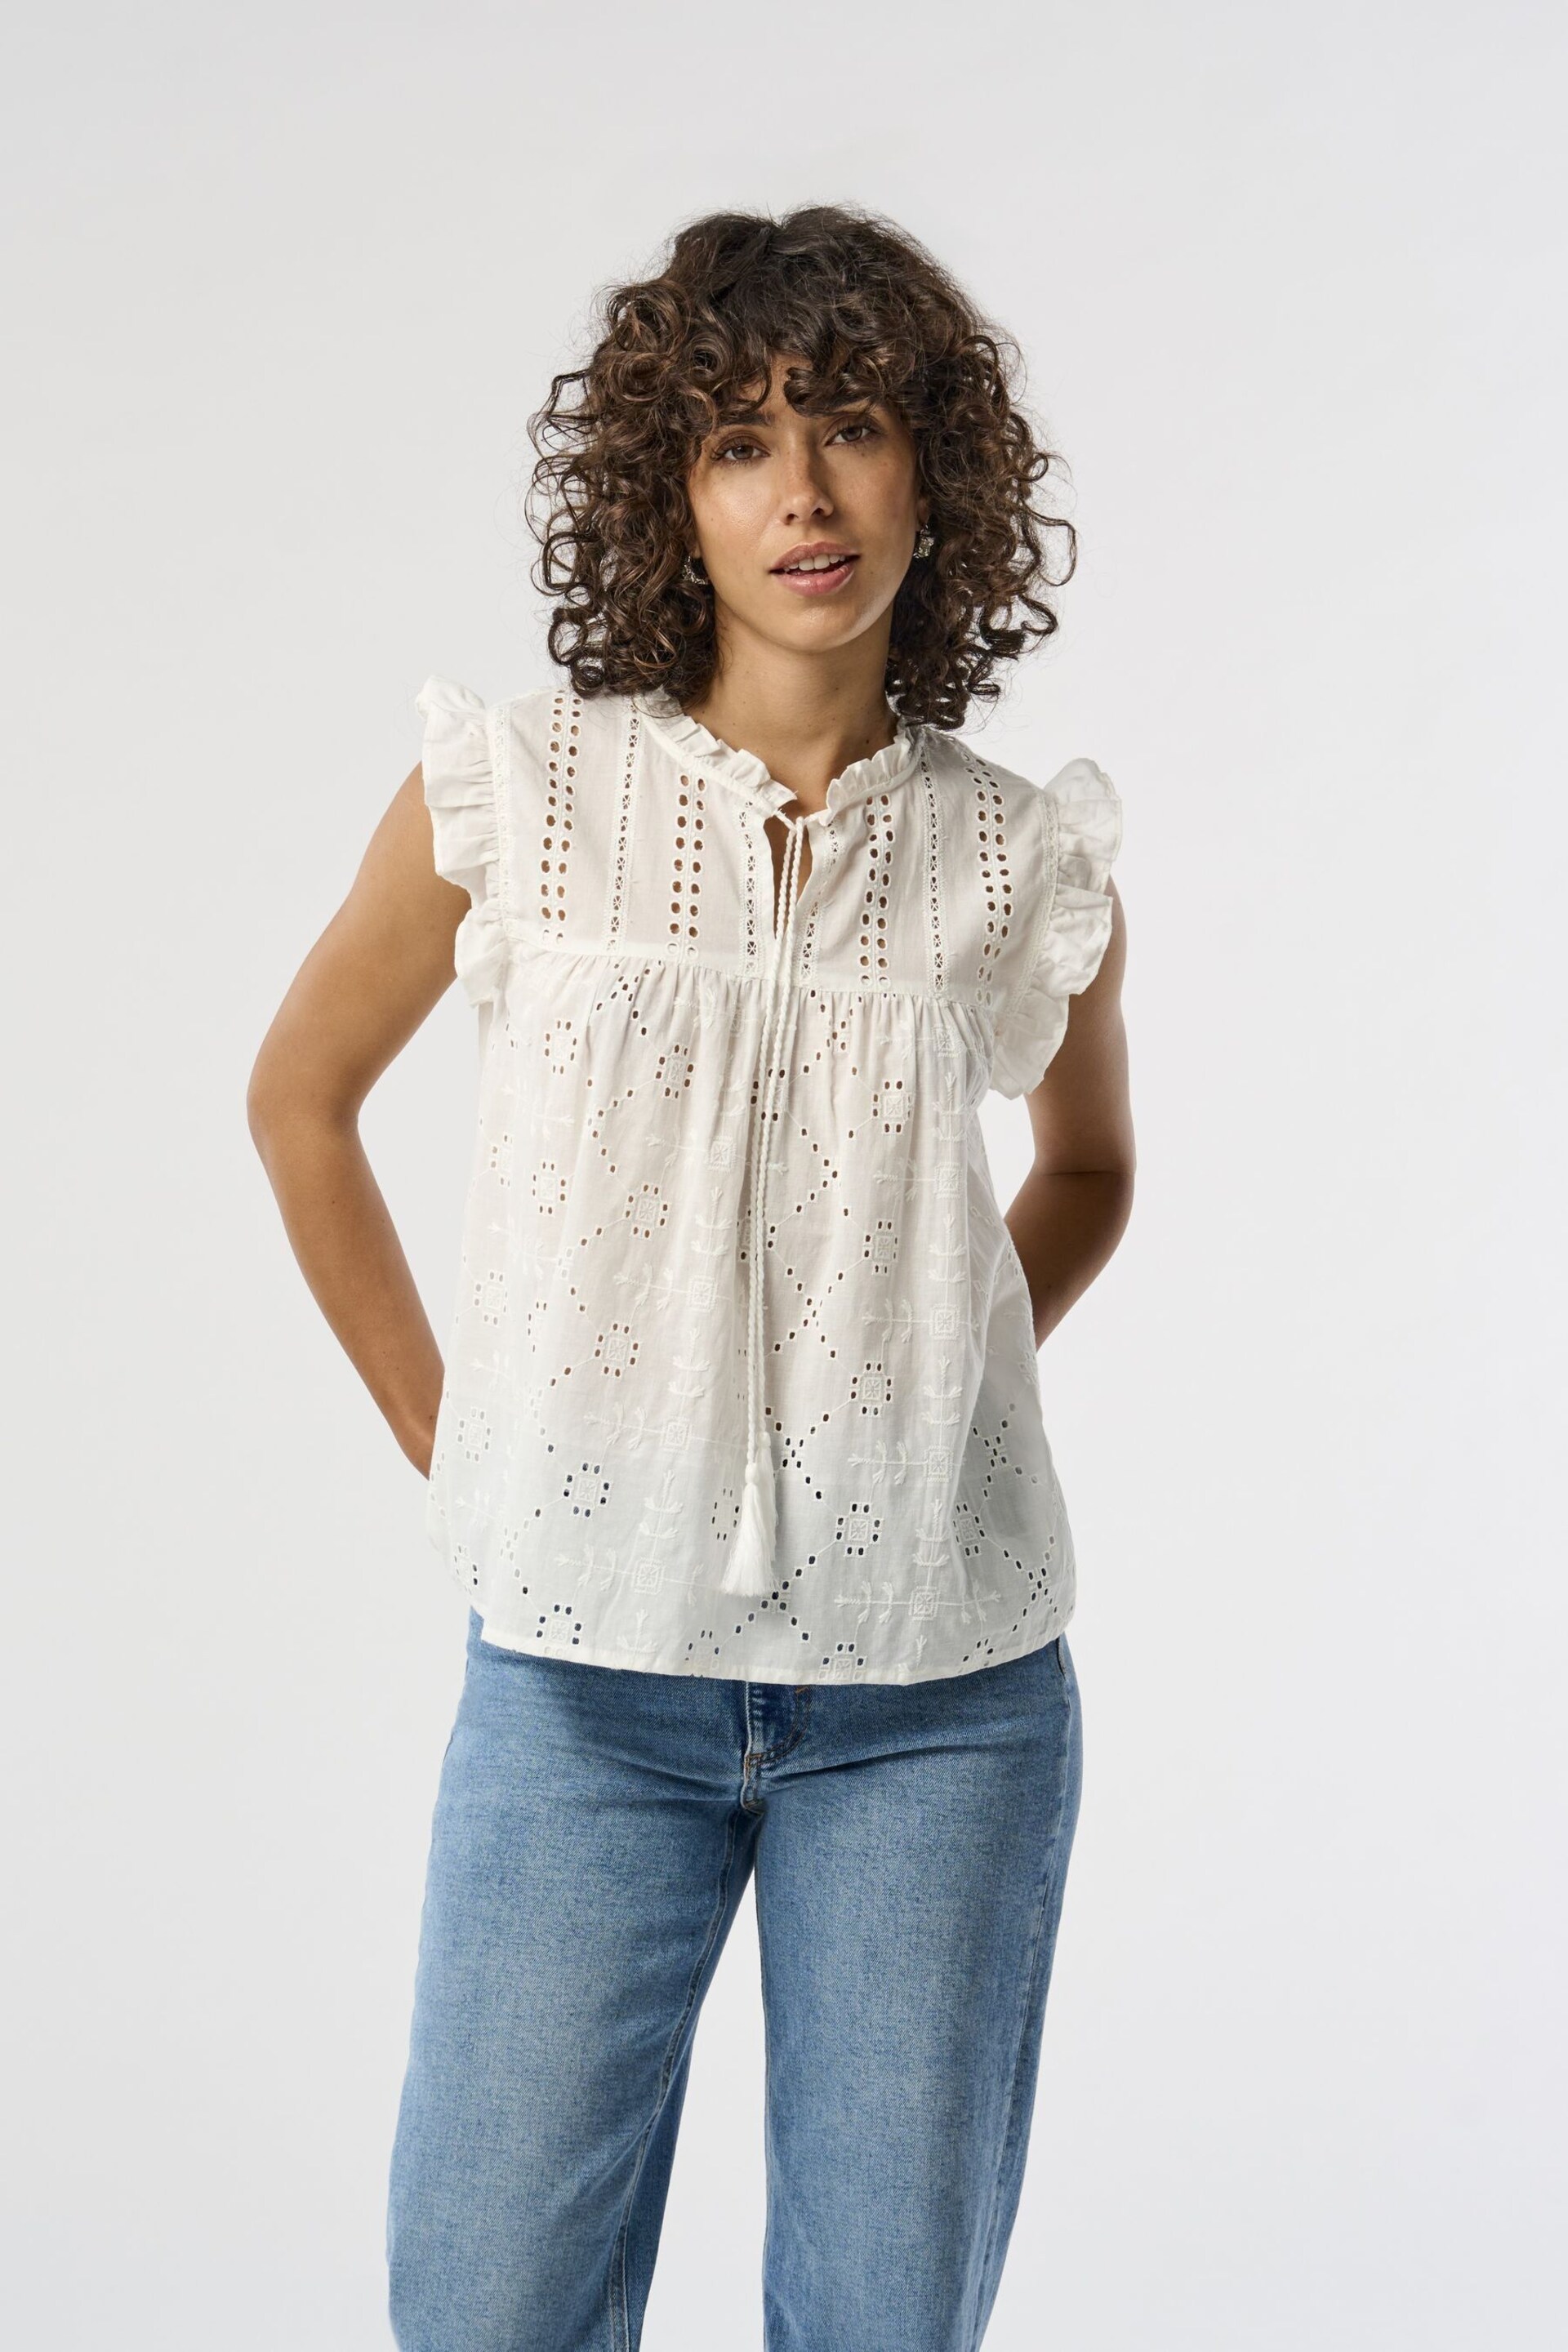 ONLY White Broderie Frill Tie Front Blouse - Image 1 of 7